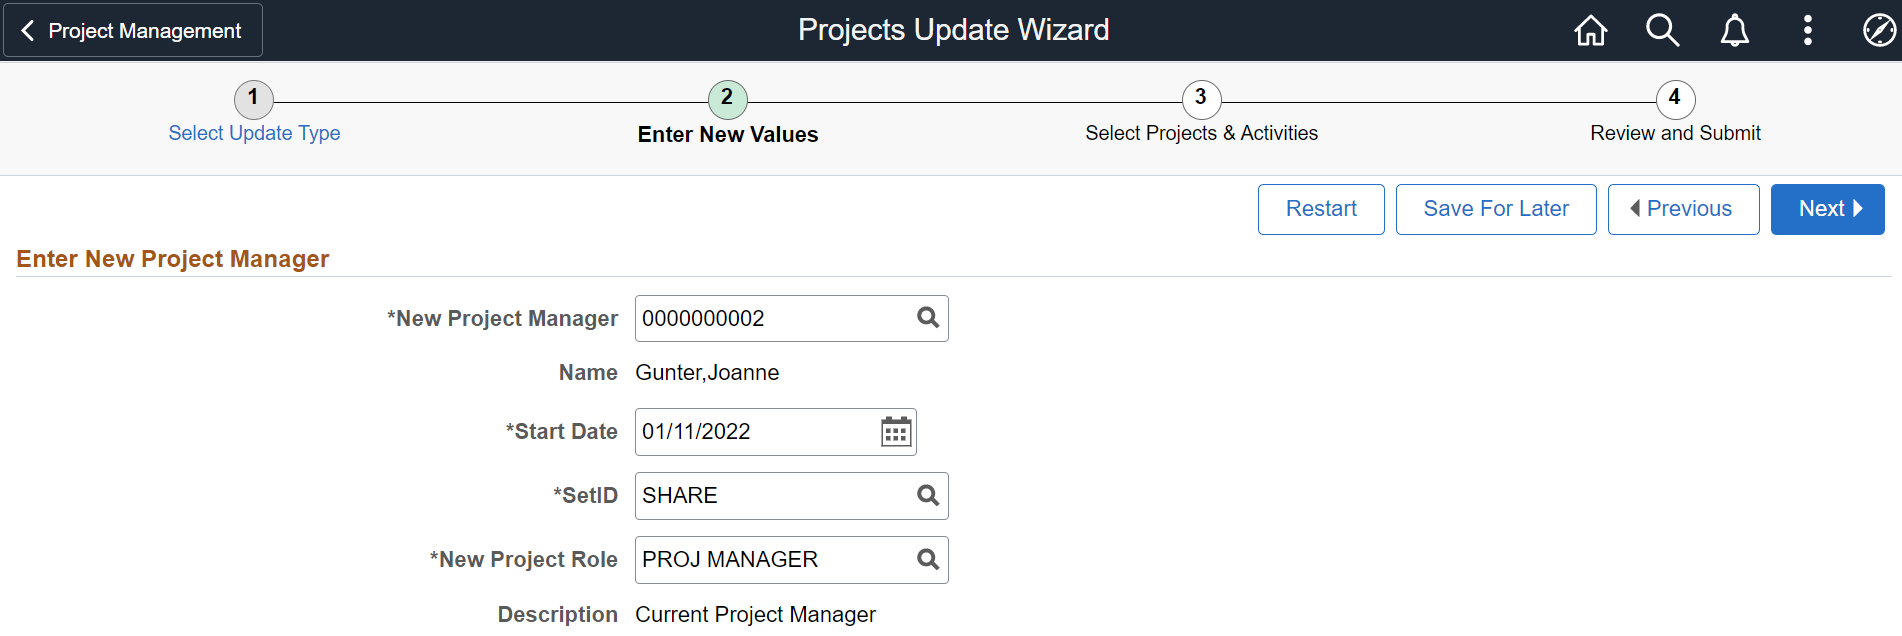 Project Update Wizard - Enter New Values